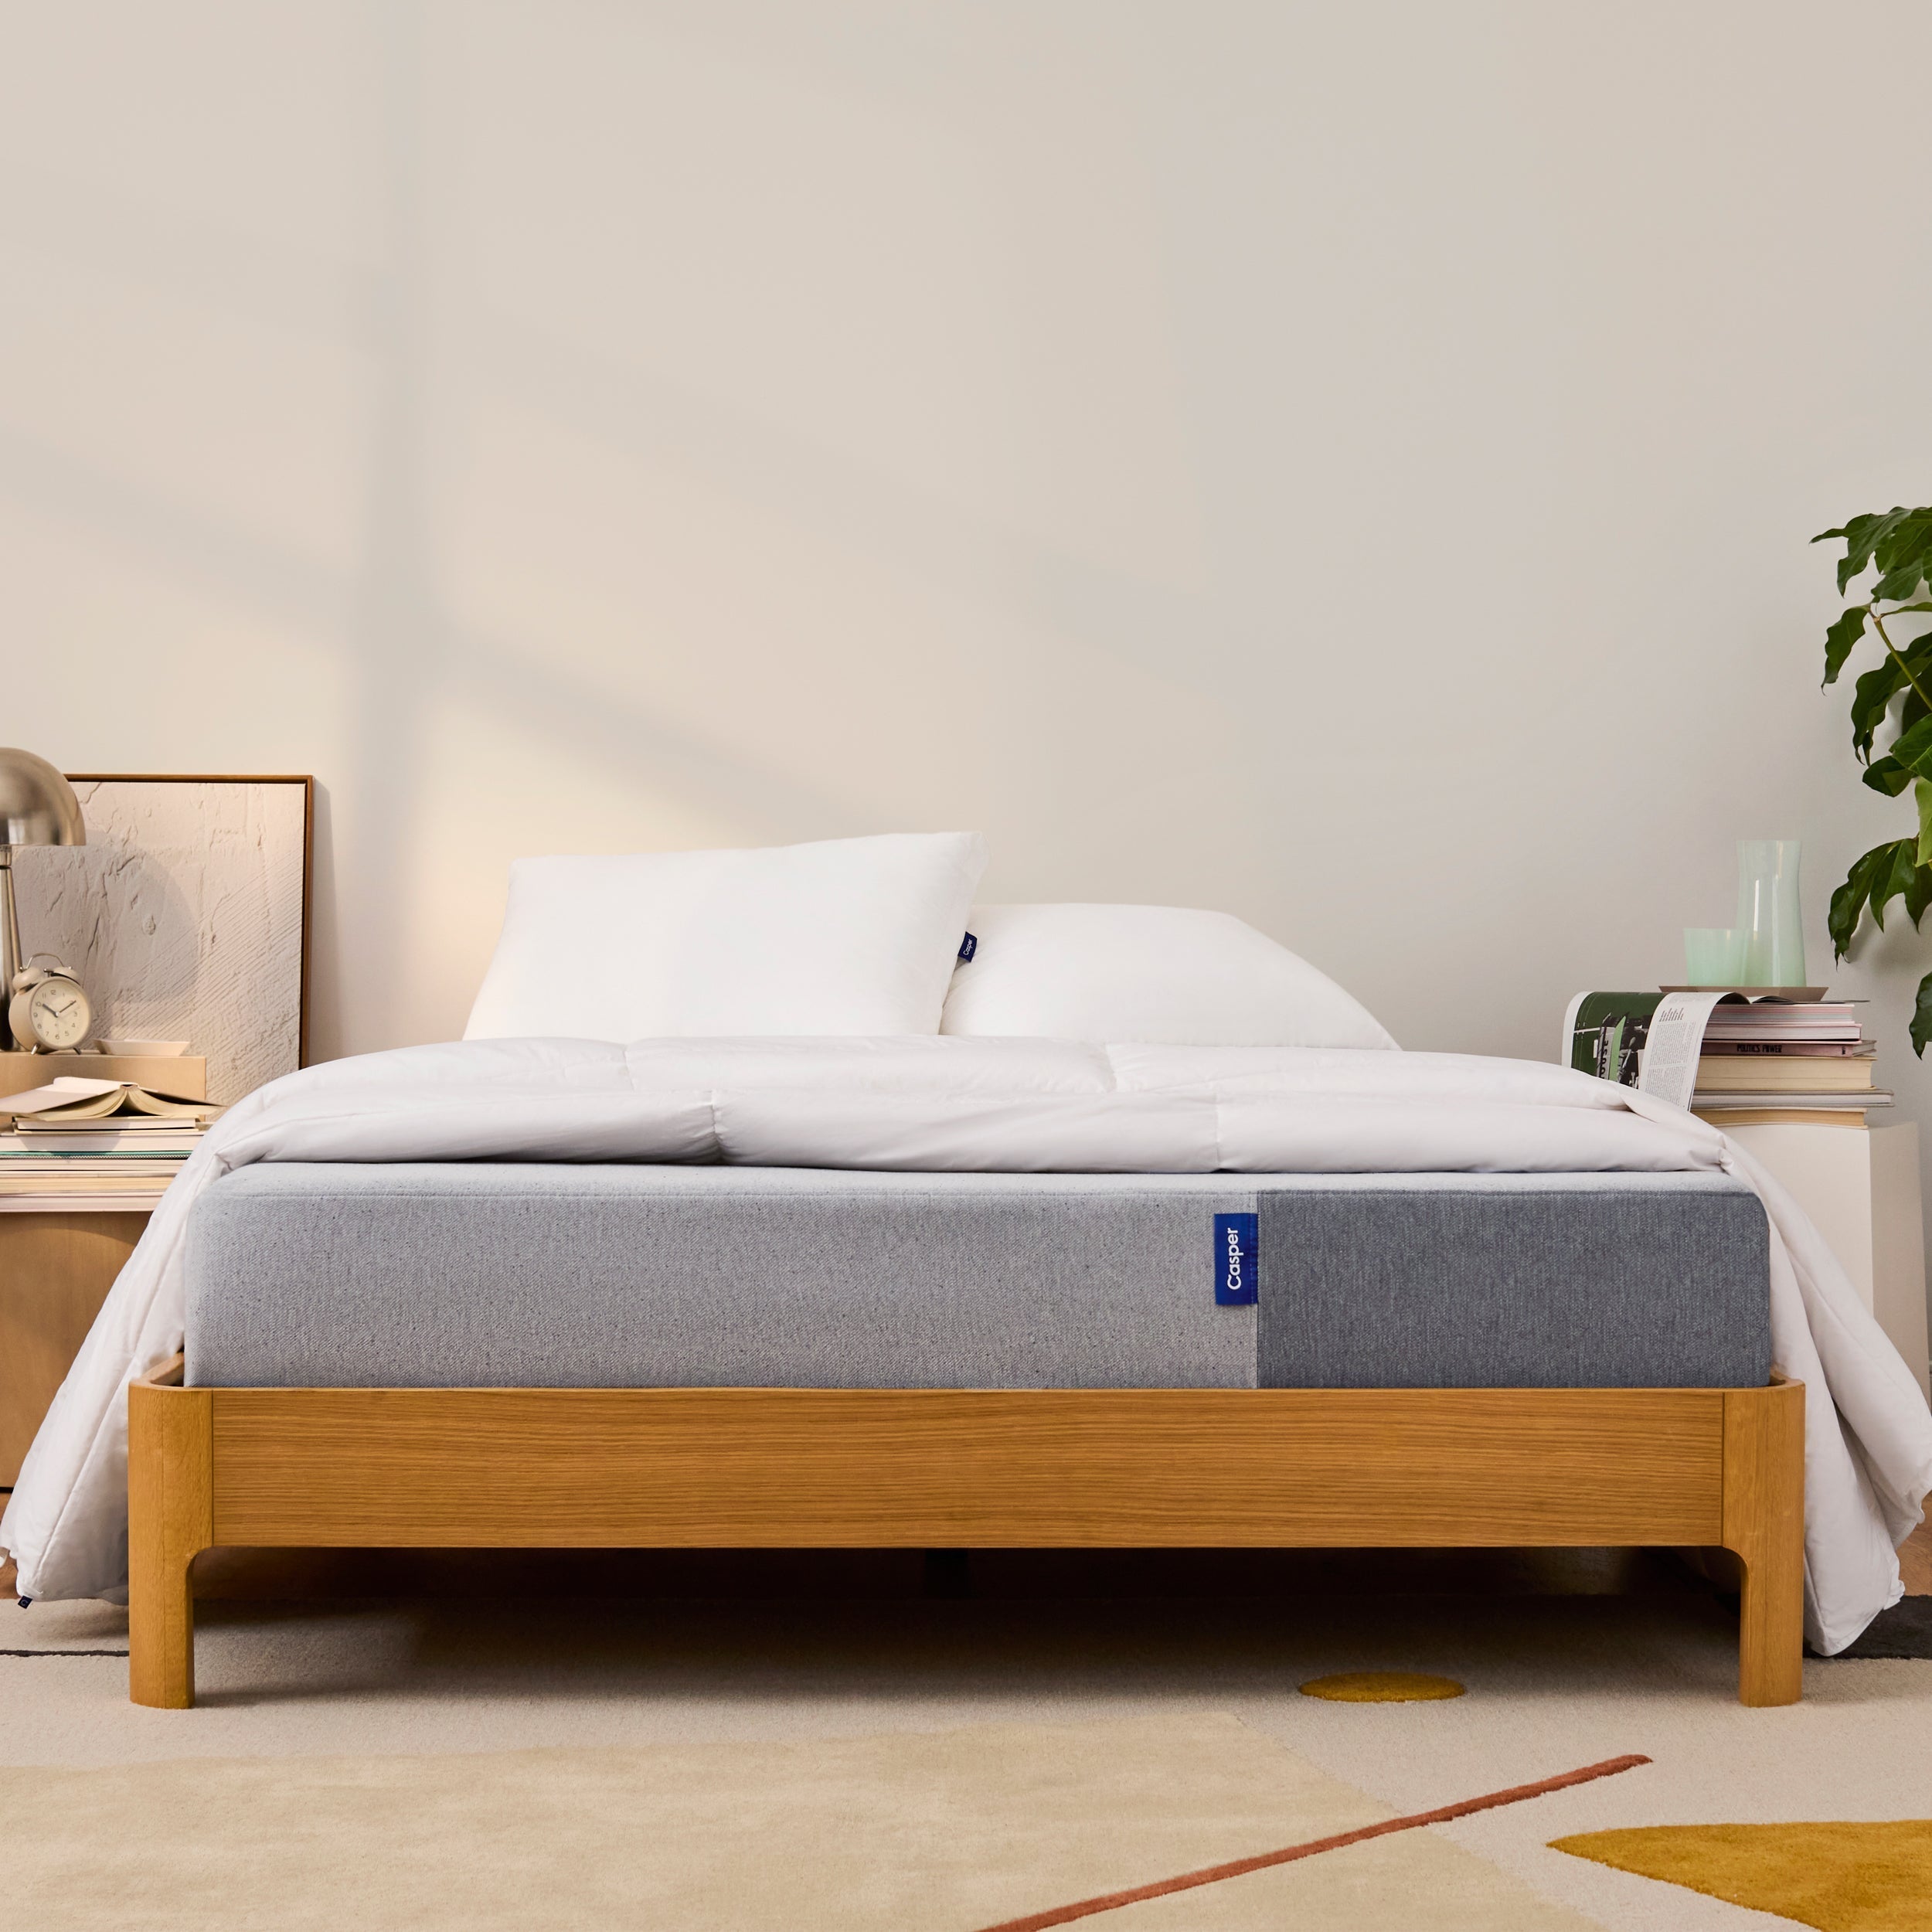 Picture of Floor Model In Store Only - The Casper Mattress